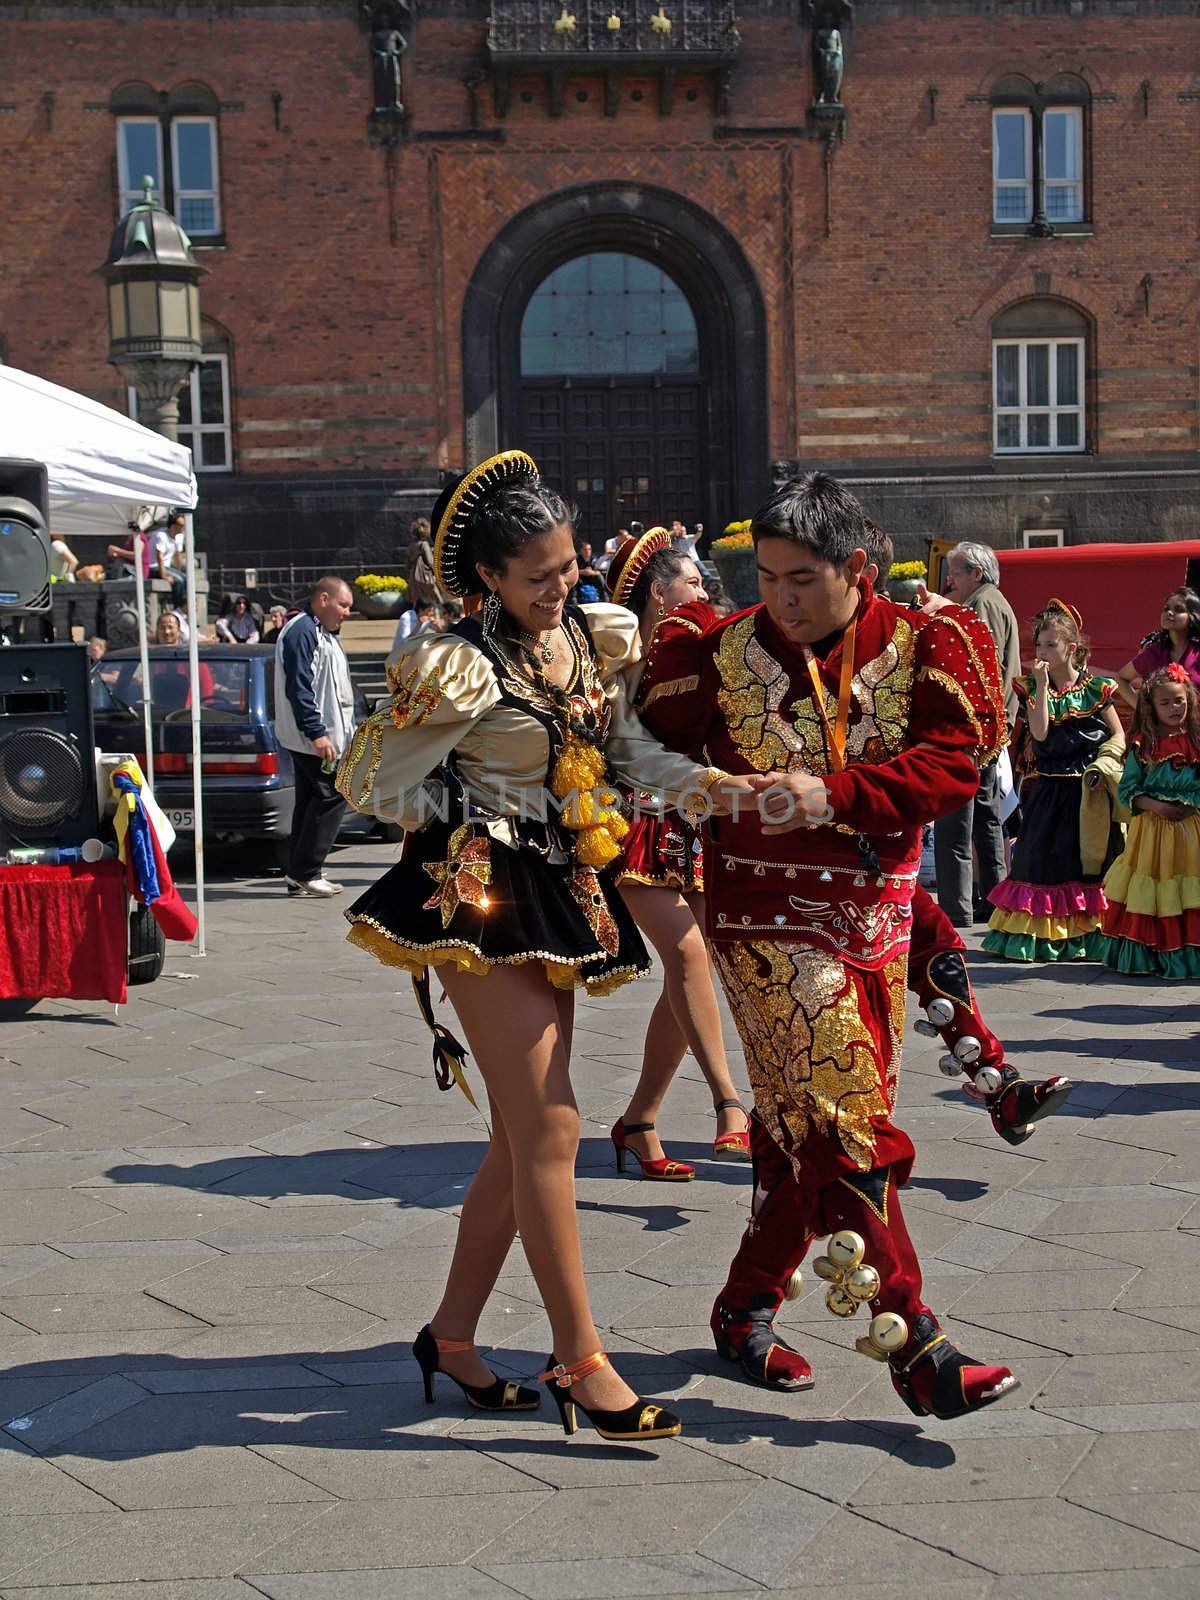 Three-day-event of fun, music, workshops and performance from 29th-31st May 2009. http://www.karneval.dk/